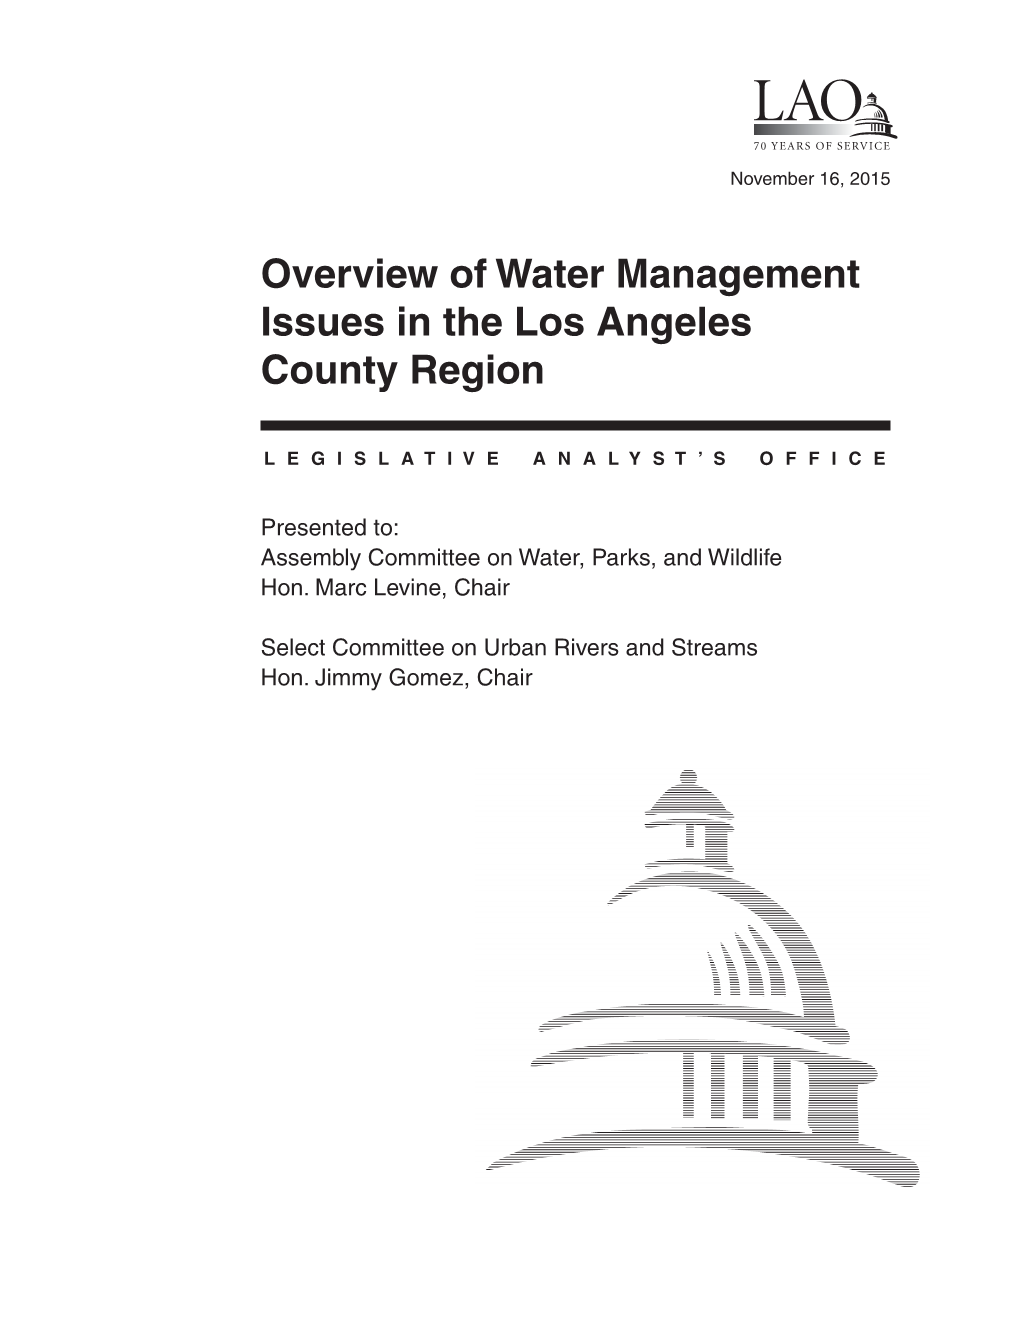 Overview of Water Management Issues in the Los Angeles County Region